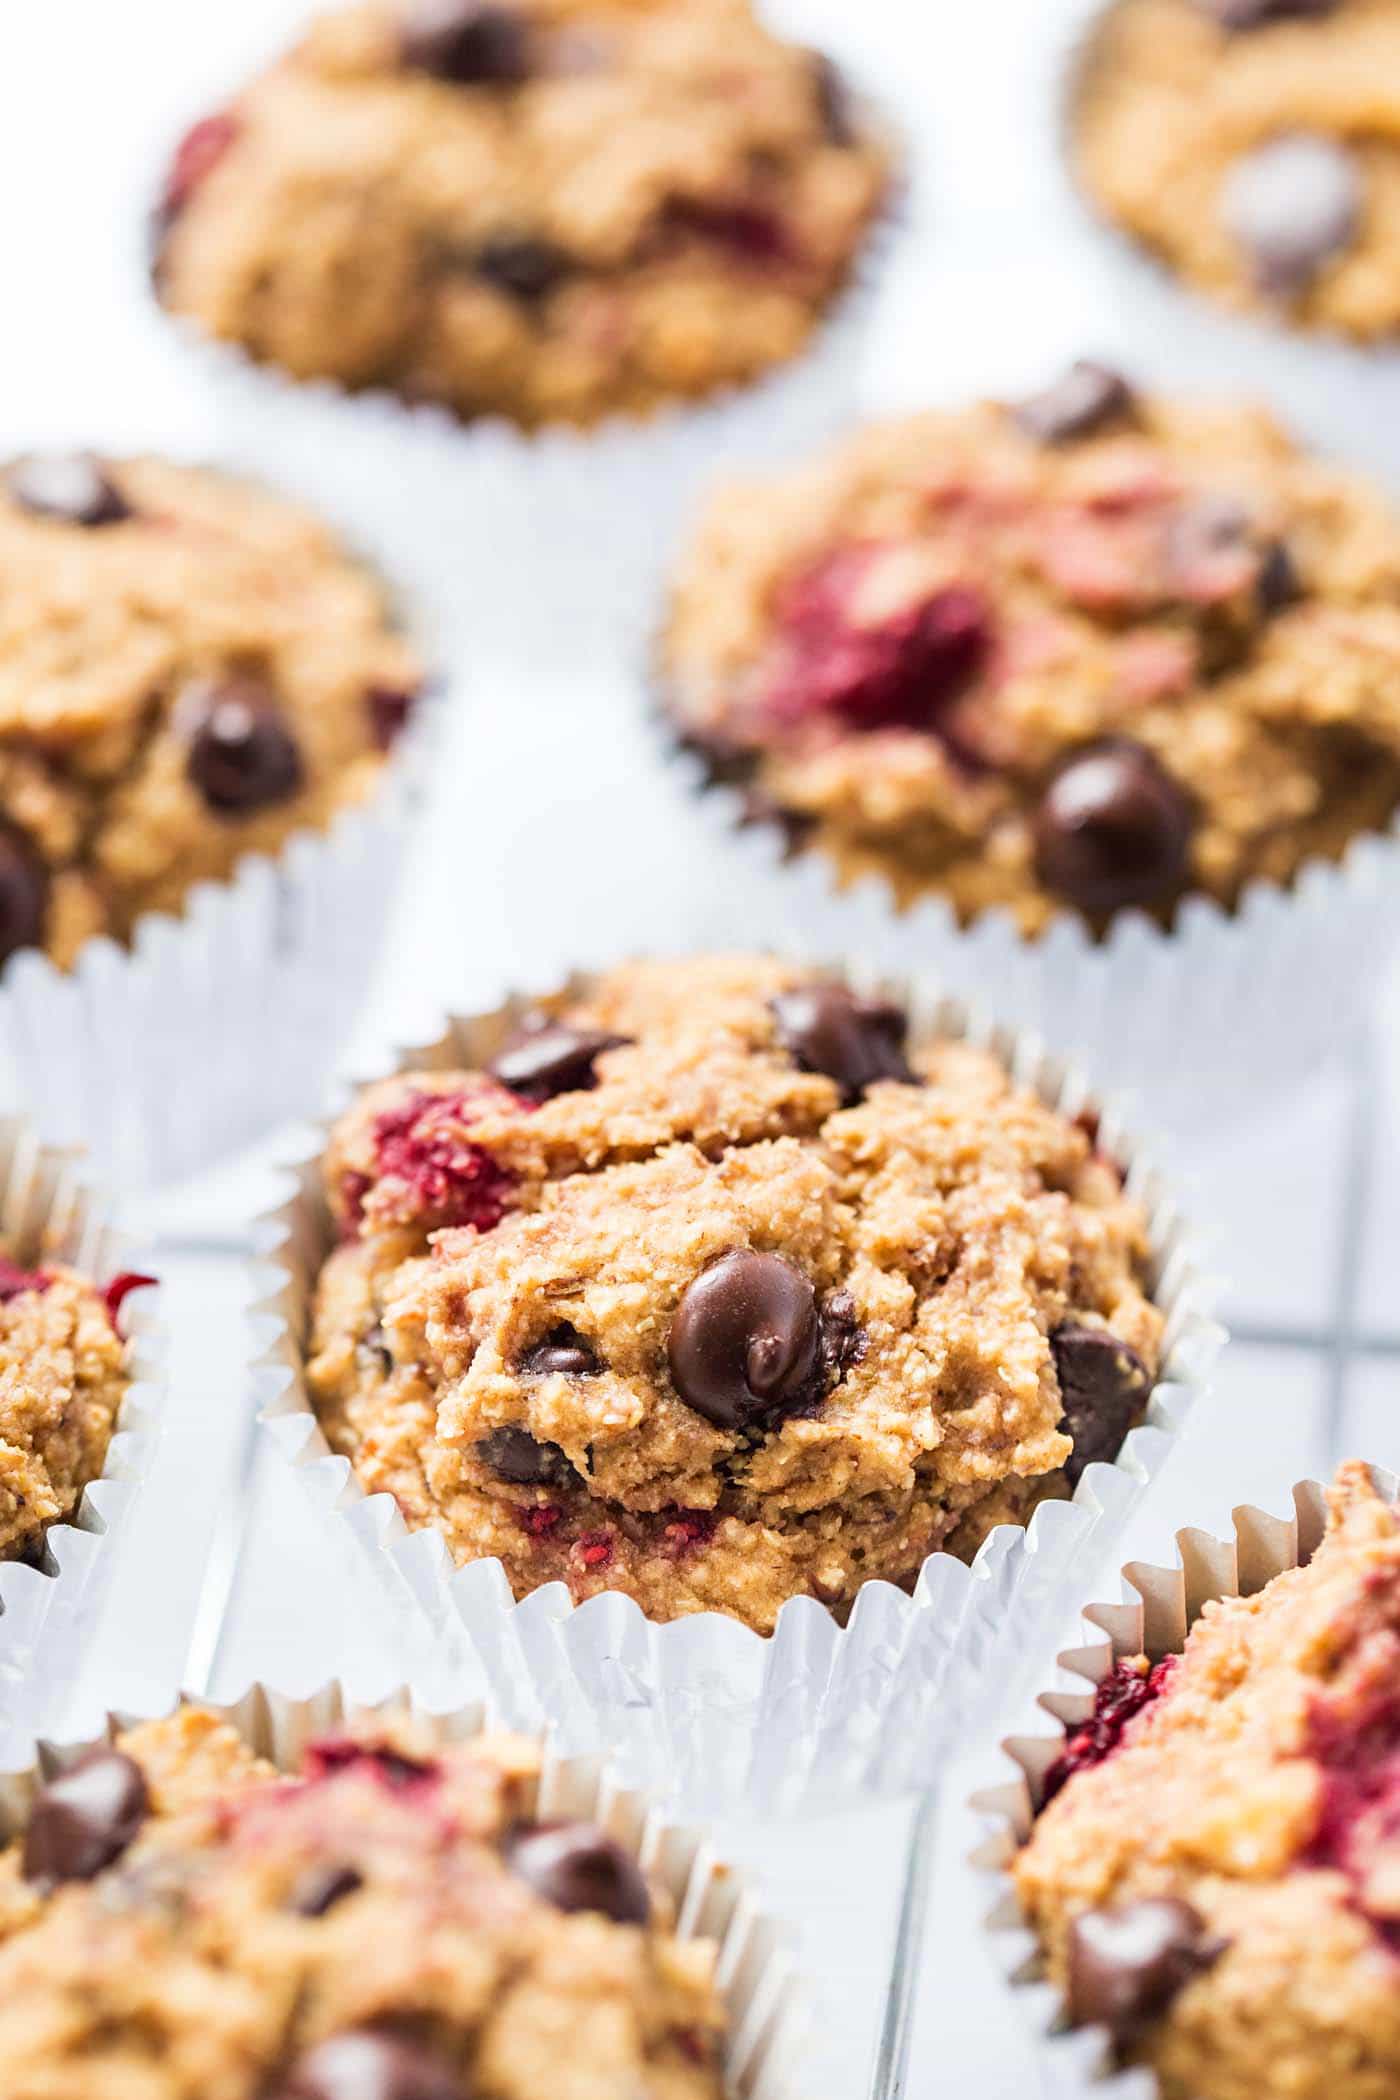 Healthy Raspberry Chocolate Chip Quinoa Muffins - sweetened naturally, made without any oils, AND they're gluten-free + vegan